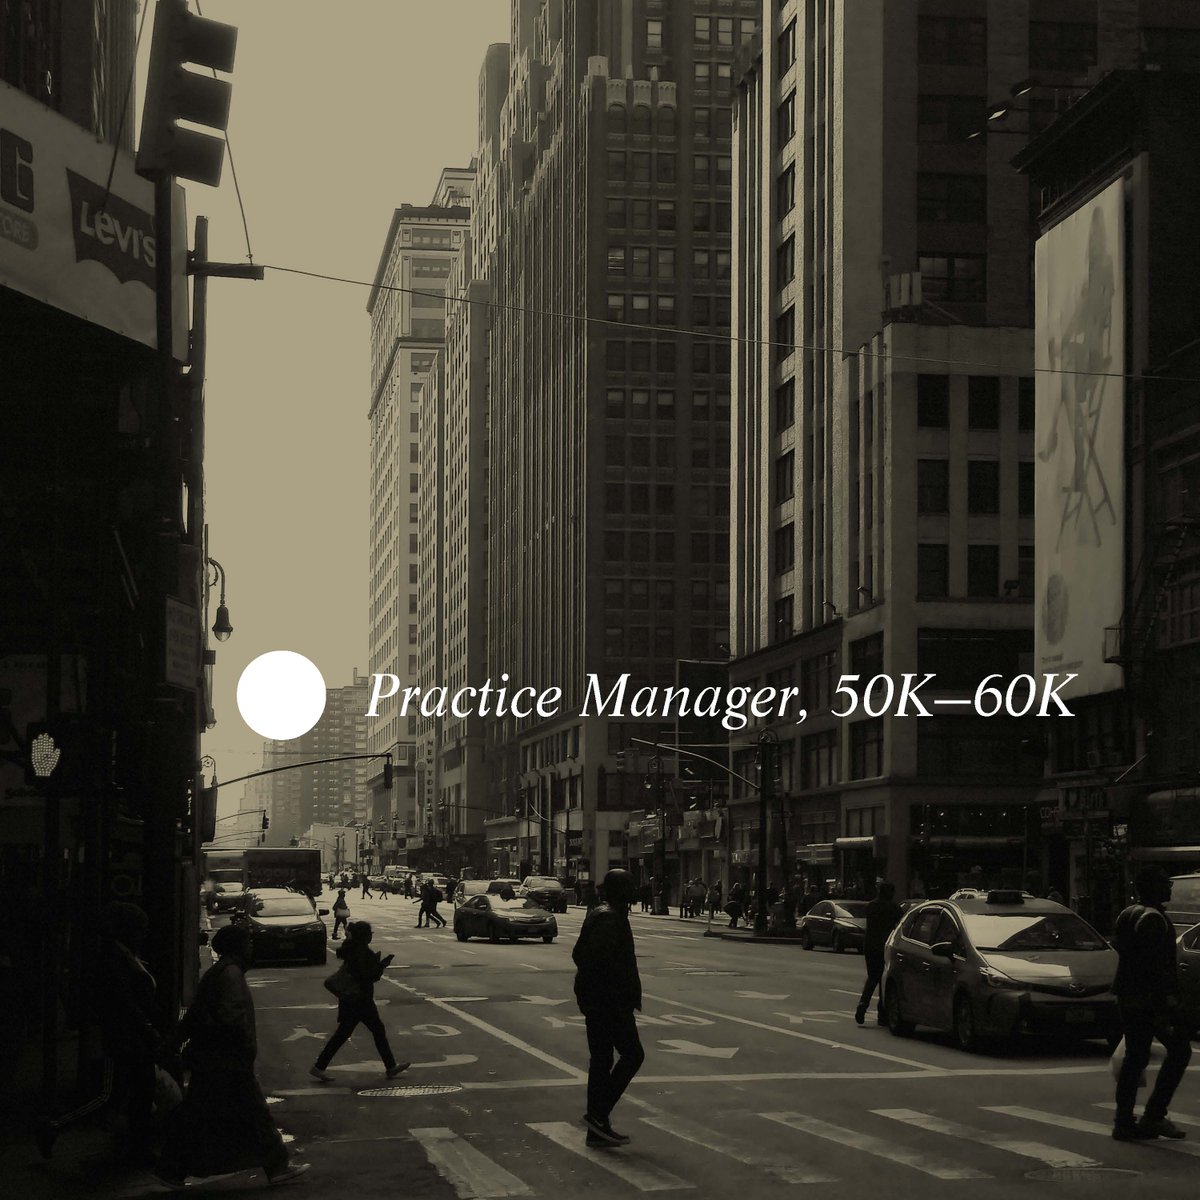 Practice Manager £50K - £60K p.a.

Located a stone’s throw from the beating heart of the city, this renowned and innovative architecture studio seeks a well-rounded and ambitious individual to join their senior leadership team as Practice Manager.

#architecturejobs #placecareers